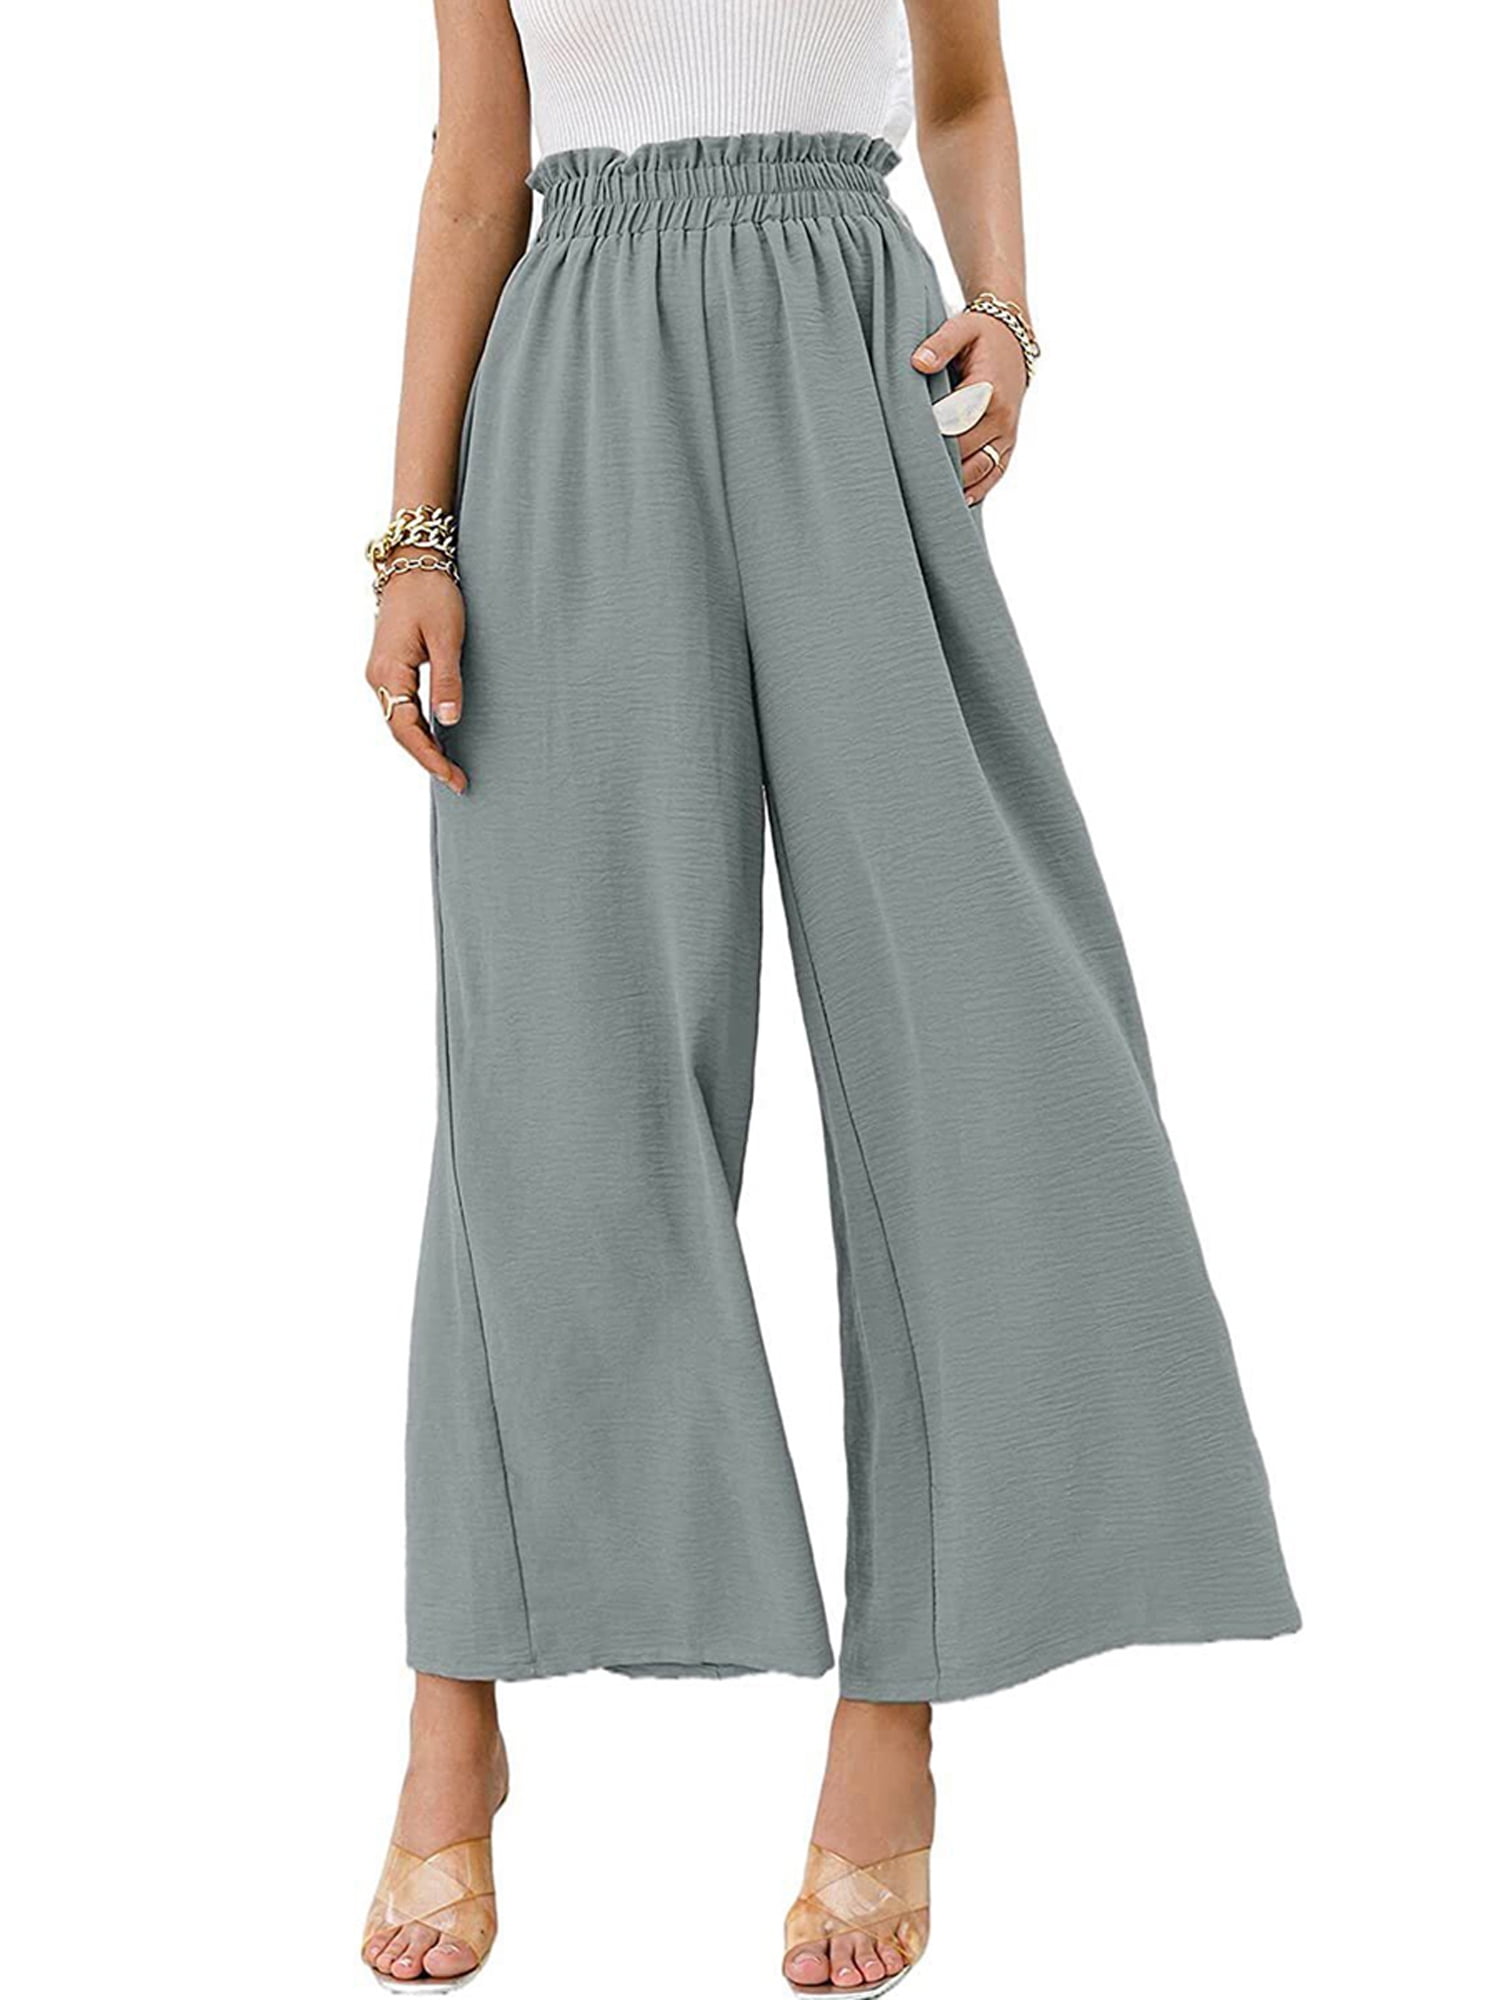 Womens Wide Leg Lounge Pants Ruffle Pleated Loose Cotton Linen Palazzo Pant Loose Comfy Tie Bow Drawstring Trousers Summer Casual Flowy Crop Pajama Pants 2019 